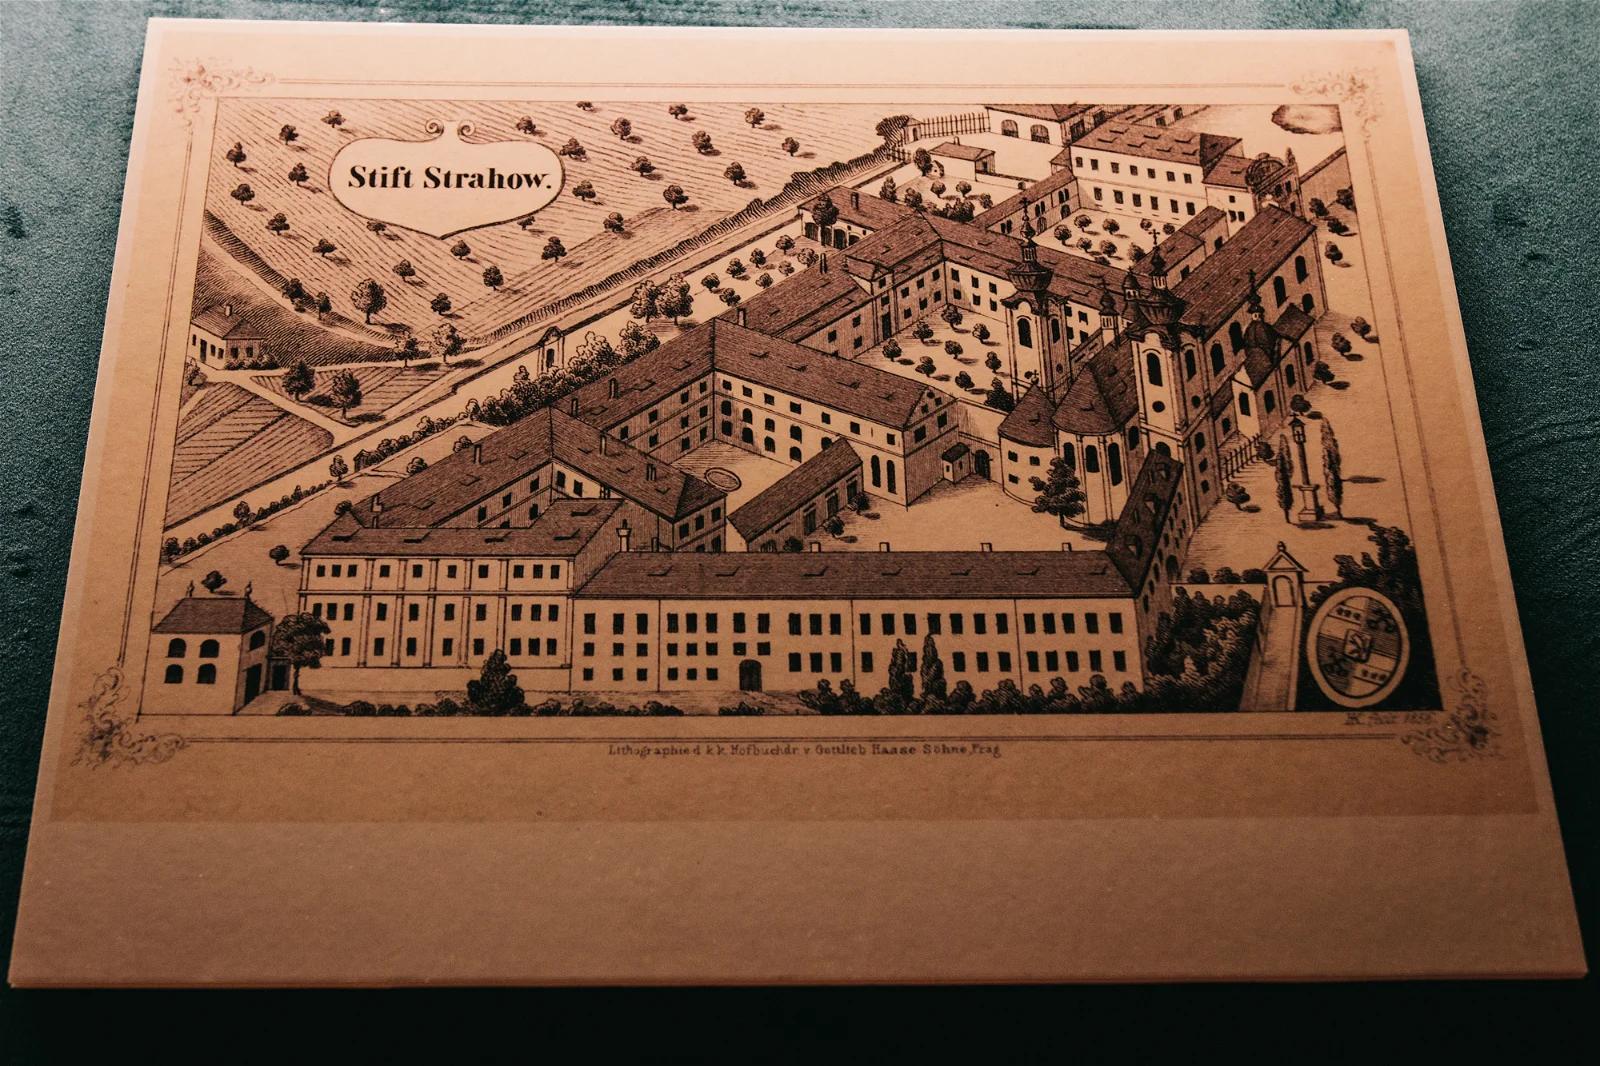 An old map or architectural drawing of a historical complex, providing a bird's-eye view of the building layout.
